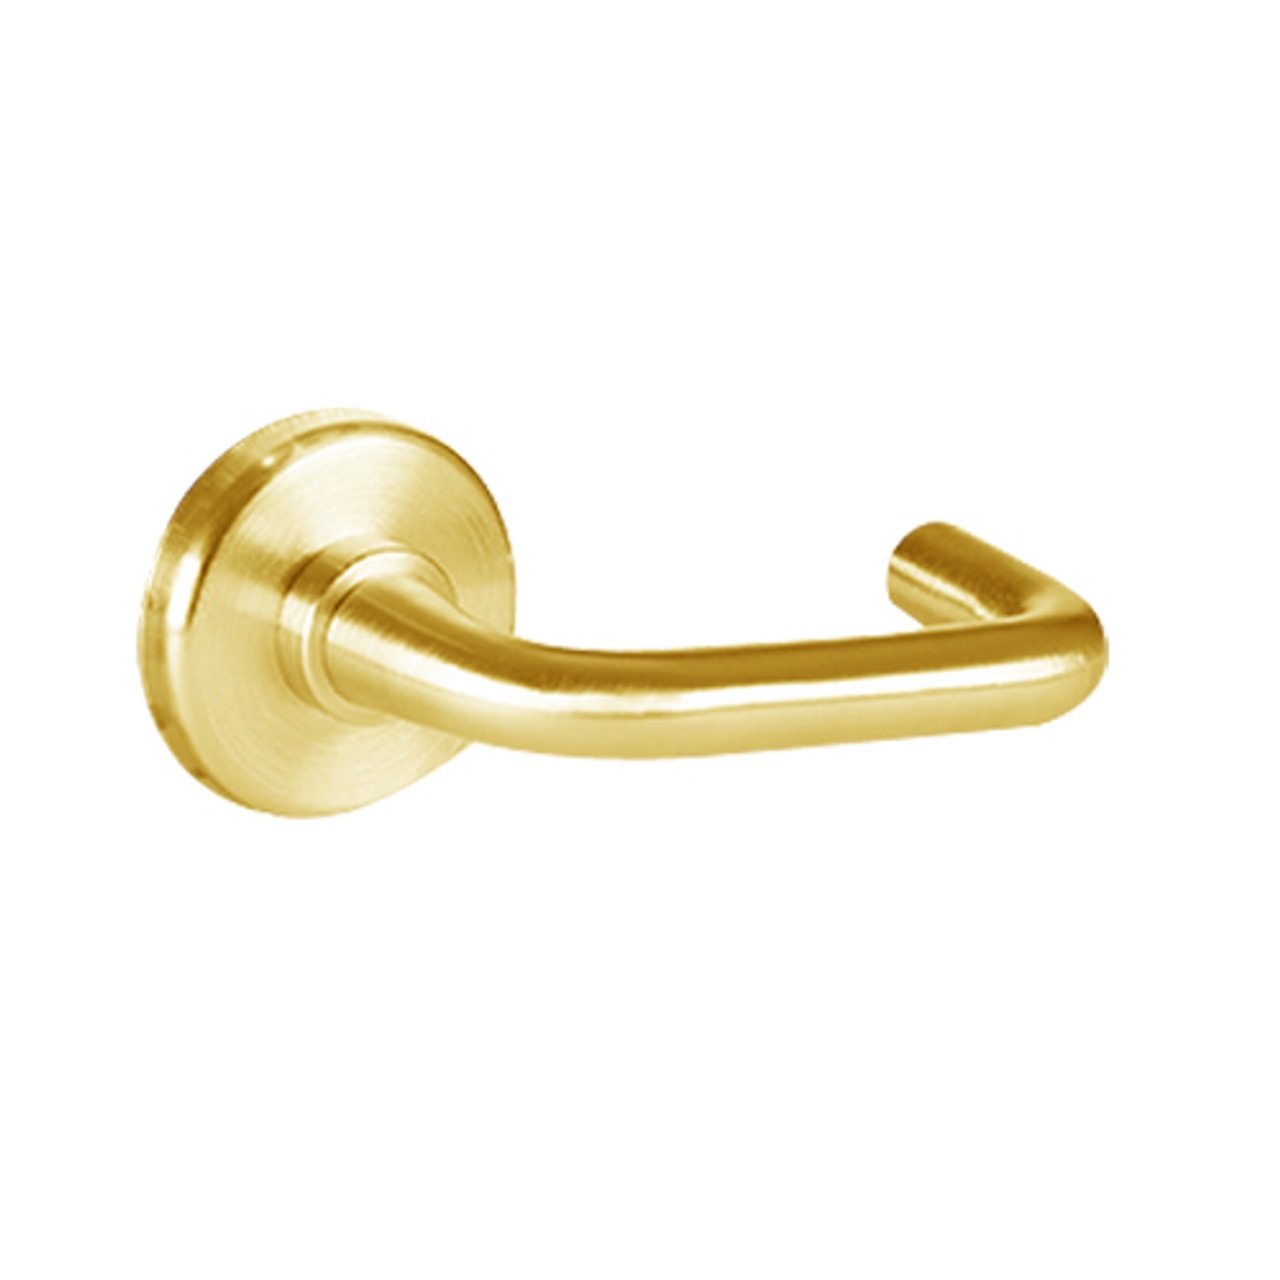 40HTKOS33H605 Best 40H Series Trim Kits Outside Lever w/ Emergency Plate with Solid Tube-Return Trim Style in Bright Brass